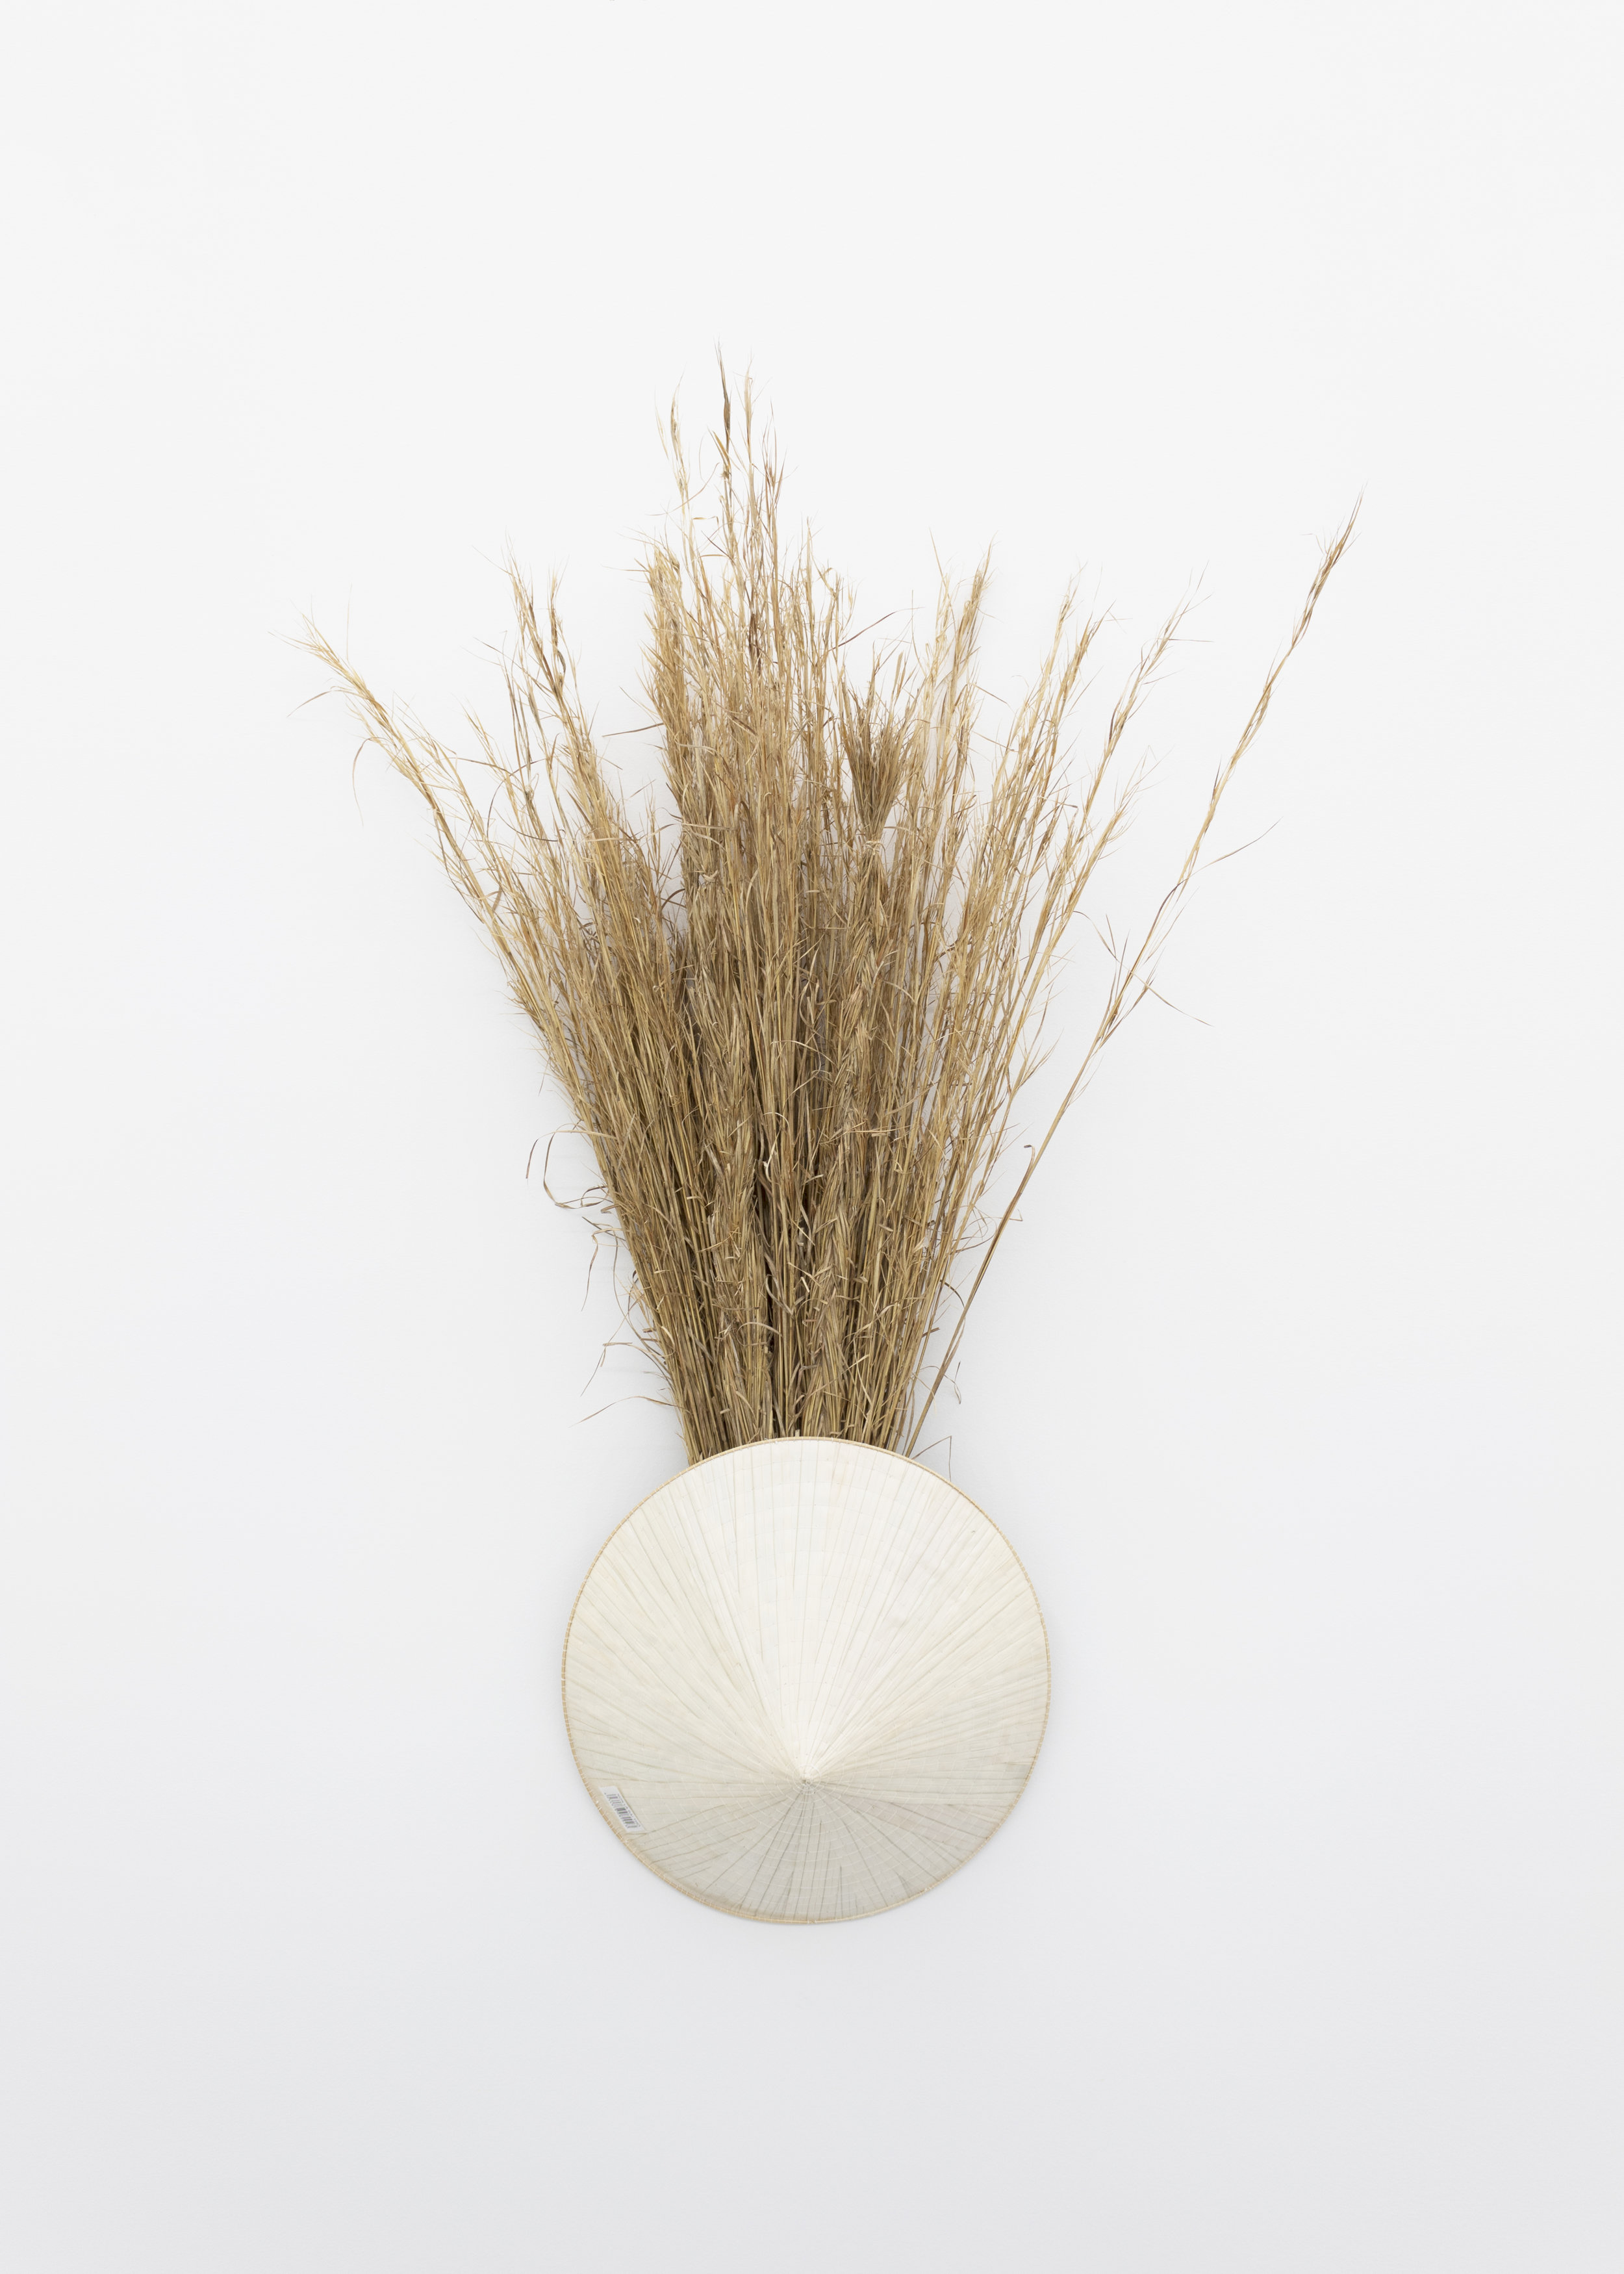  Millian Giang Lien Pham,  Preforge: 9 Stages (Seven) , 2019. Grass, conical hat 